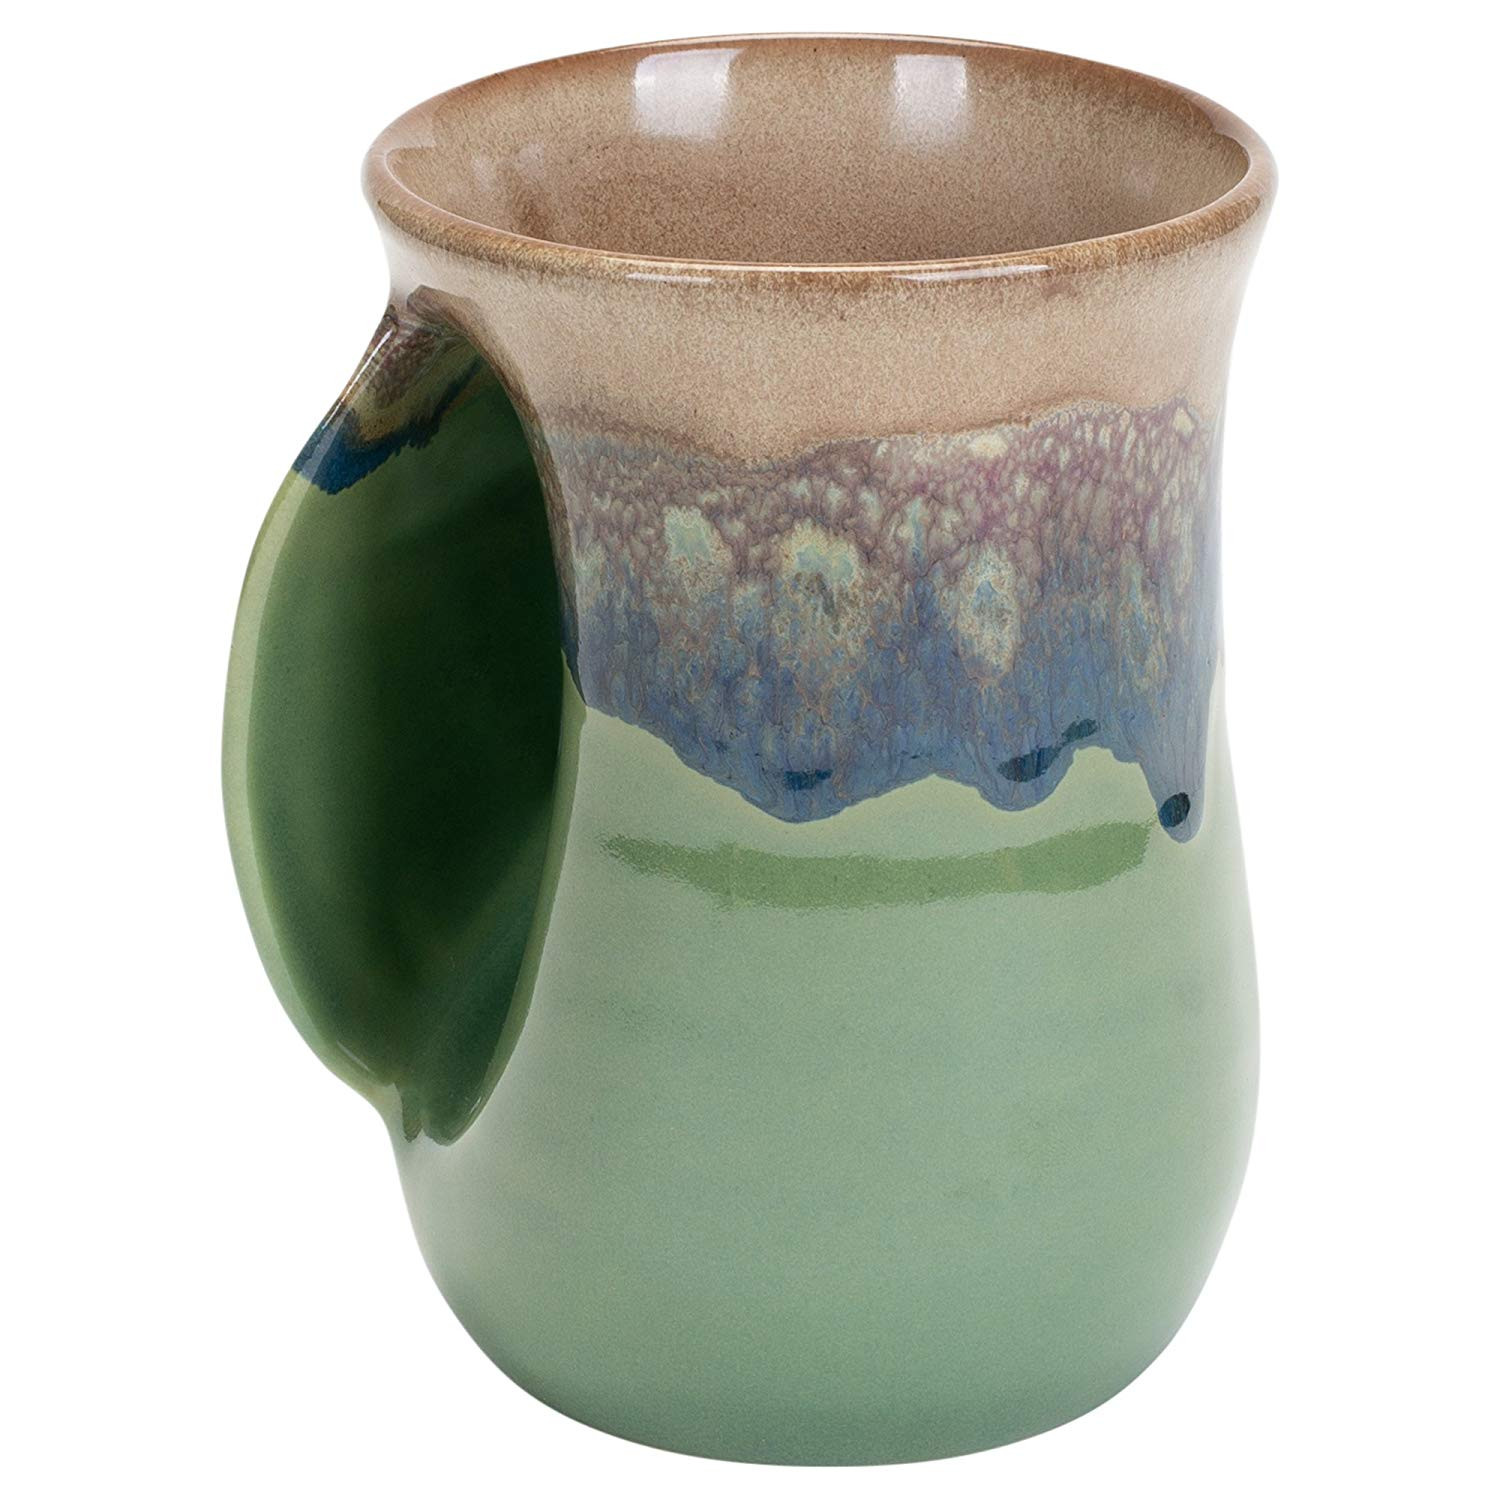 15 Wonderful Old Time Pottery Glass Vases 2024 free download old time pottery glass vases of amazon com clay in motion handwarmer mug mountain meadows left regarding amazon com clay in motion handwarmer mug mountain meadows left handed kitchen dining